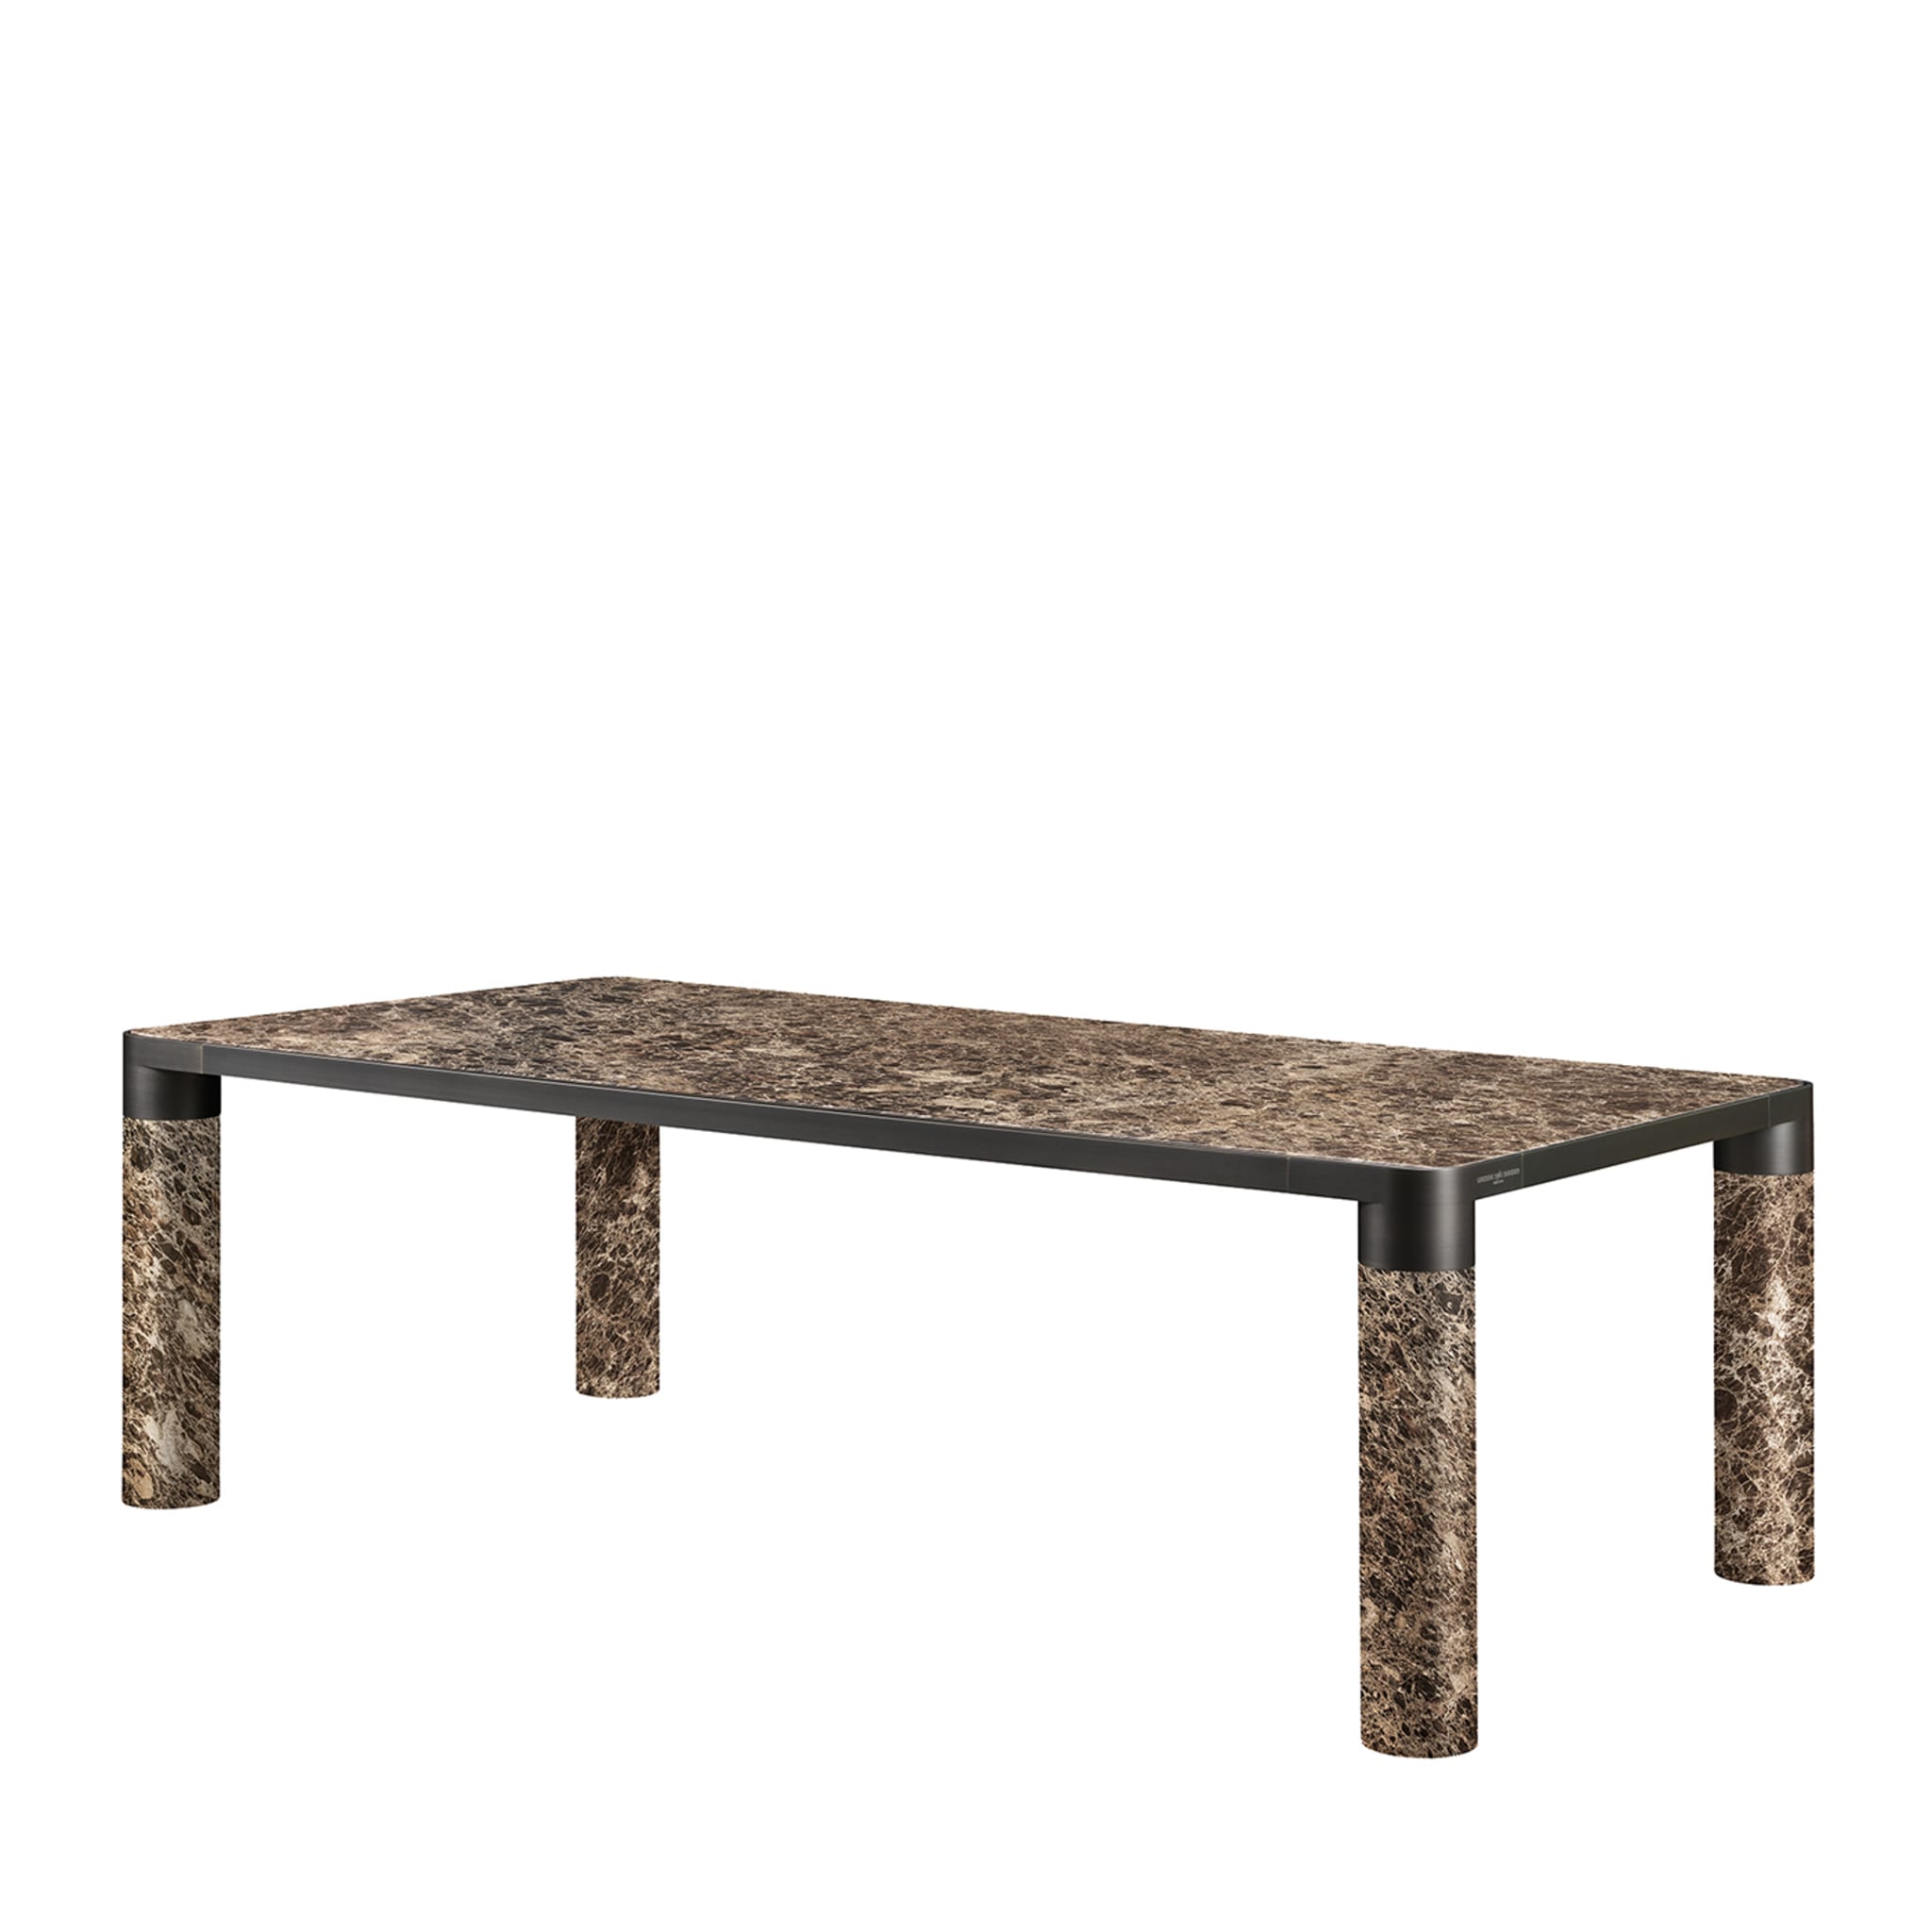 Bold Rectangular Brown Marble Dining Table by Elisa Giovannoni - Alternative view 1